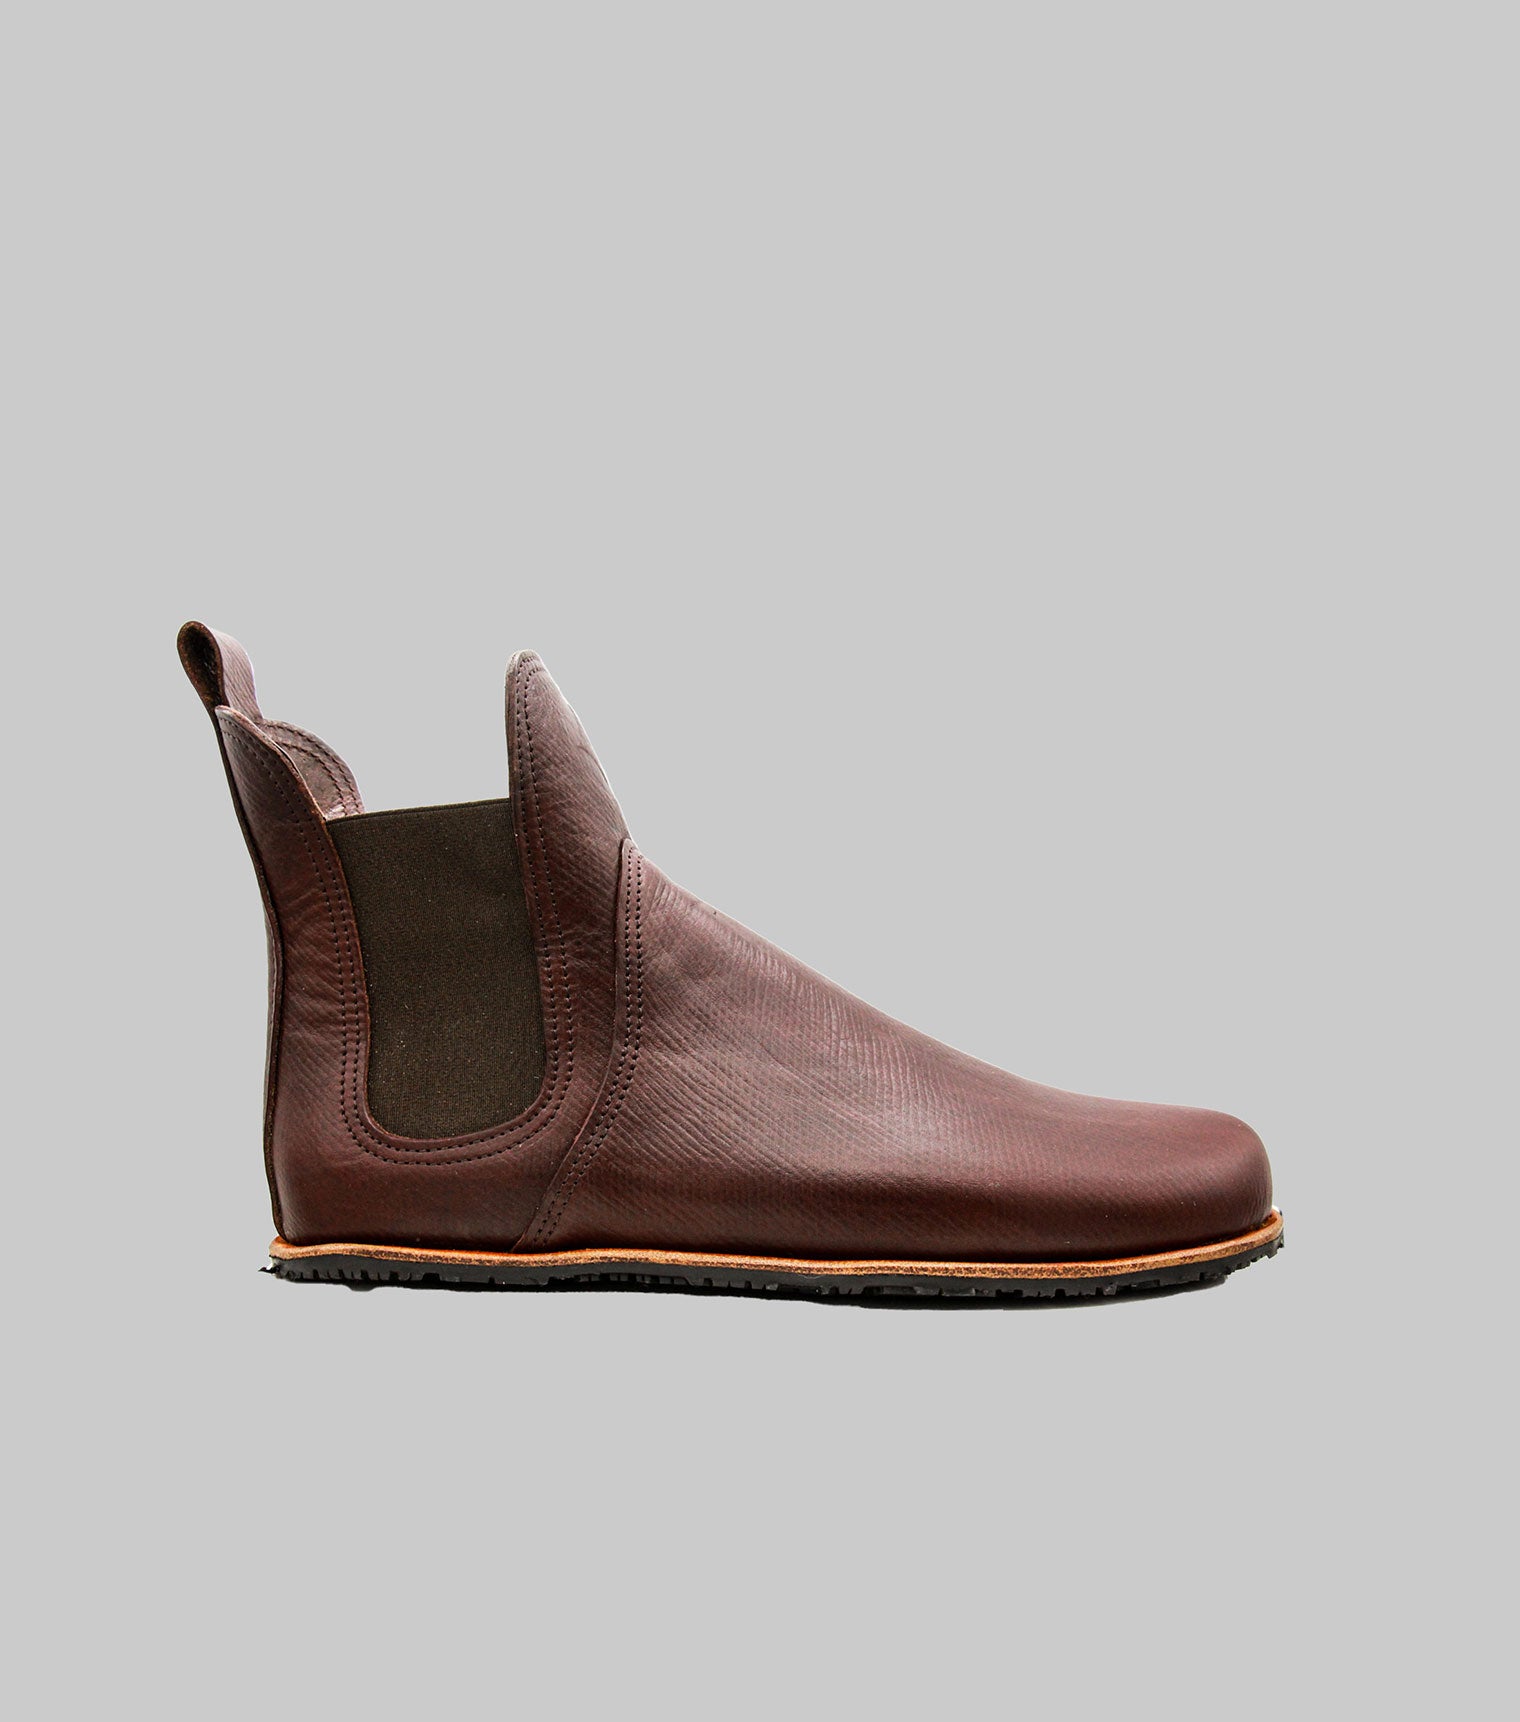 Barefoot Chelsea Boots in Brown 'Baker's Russian' Calf Leather